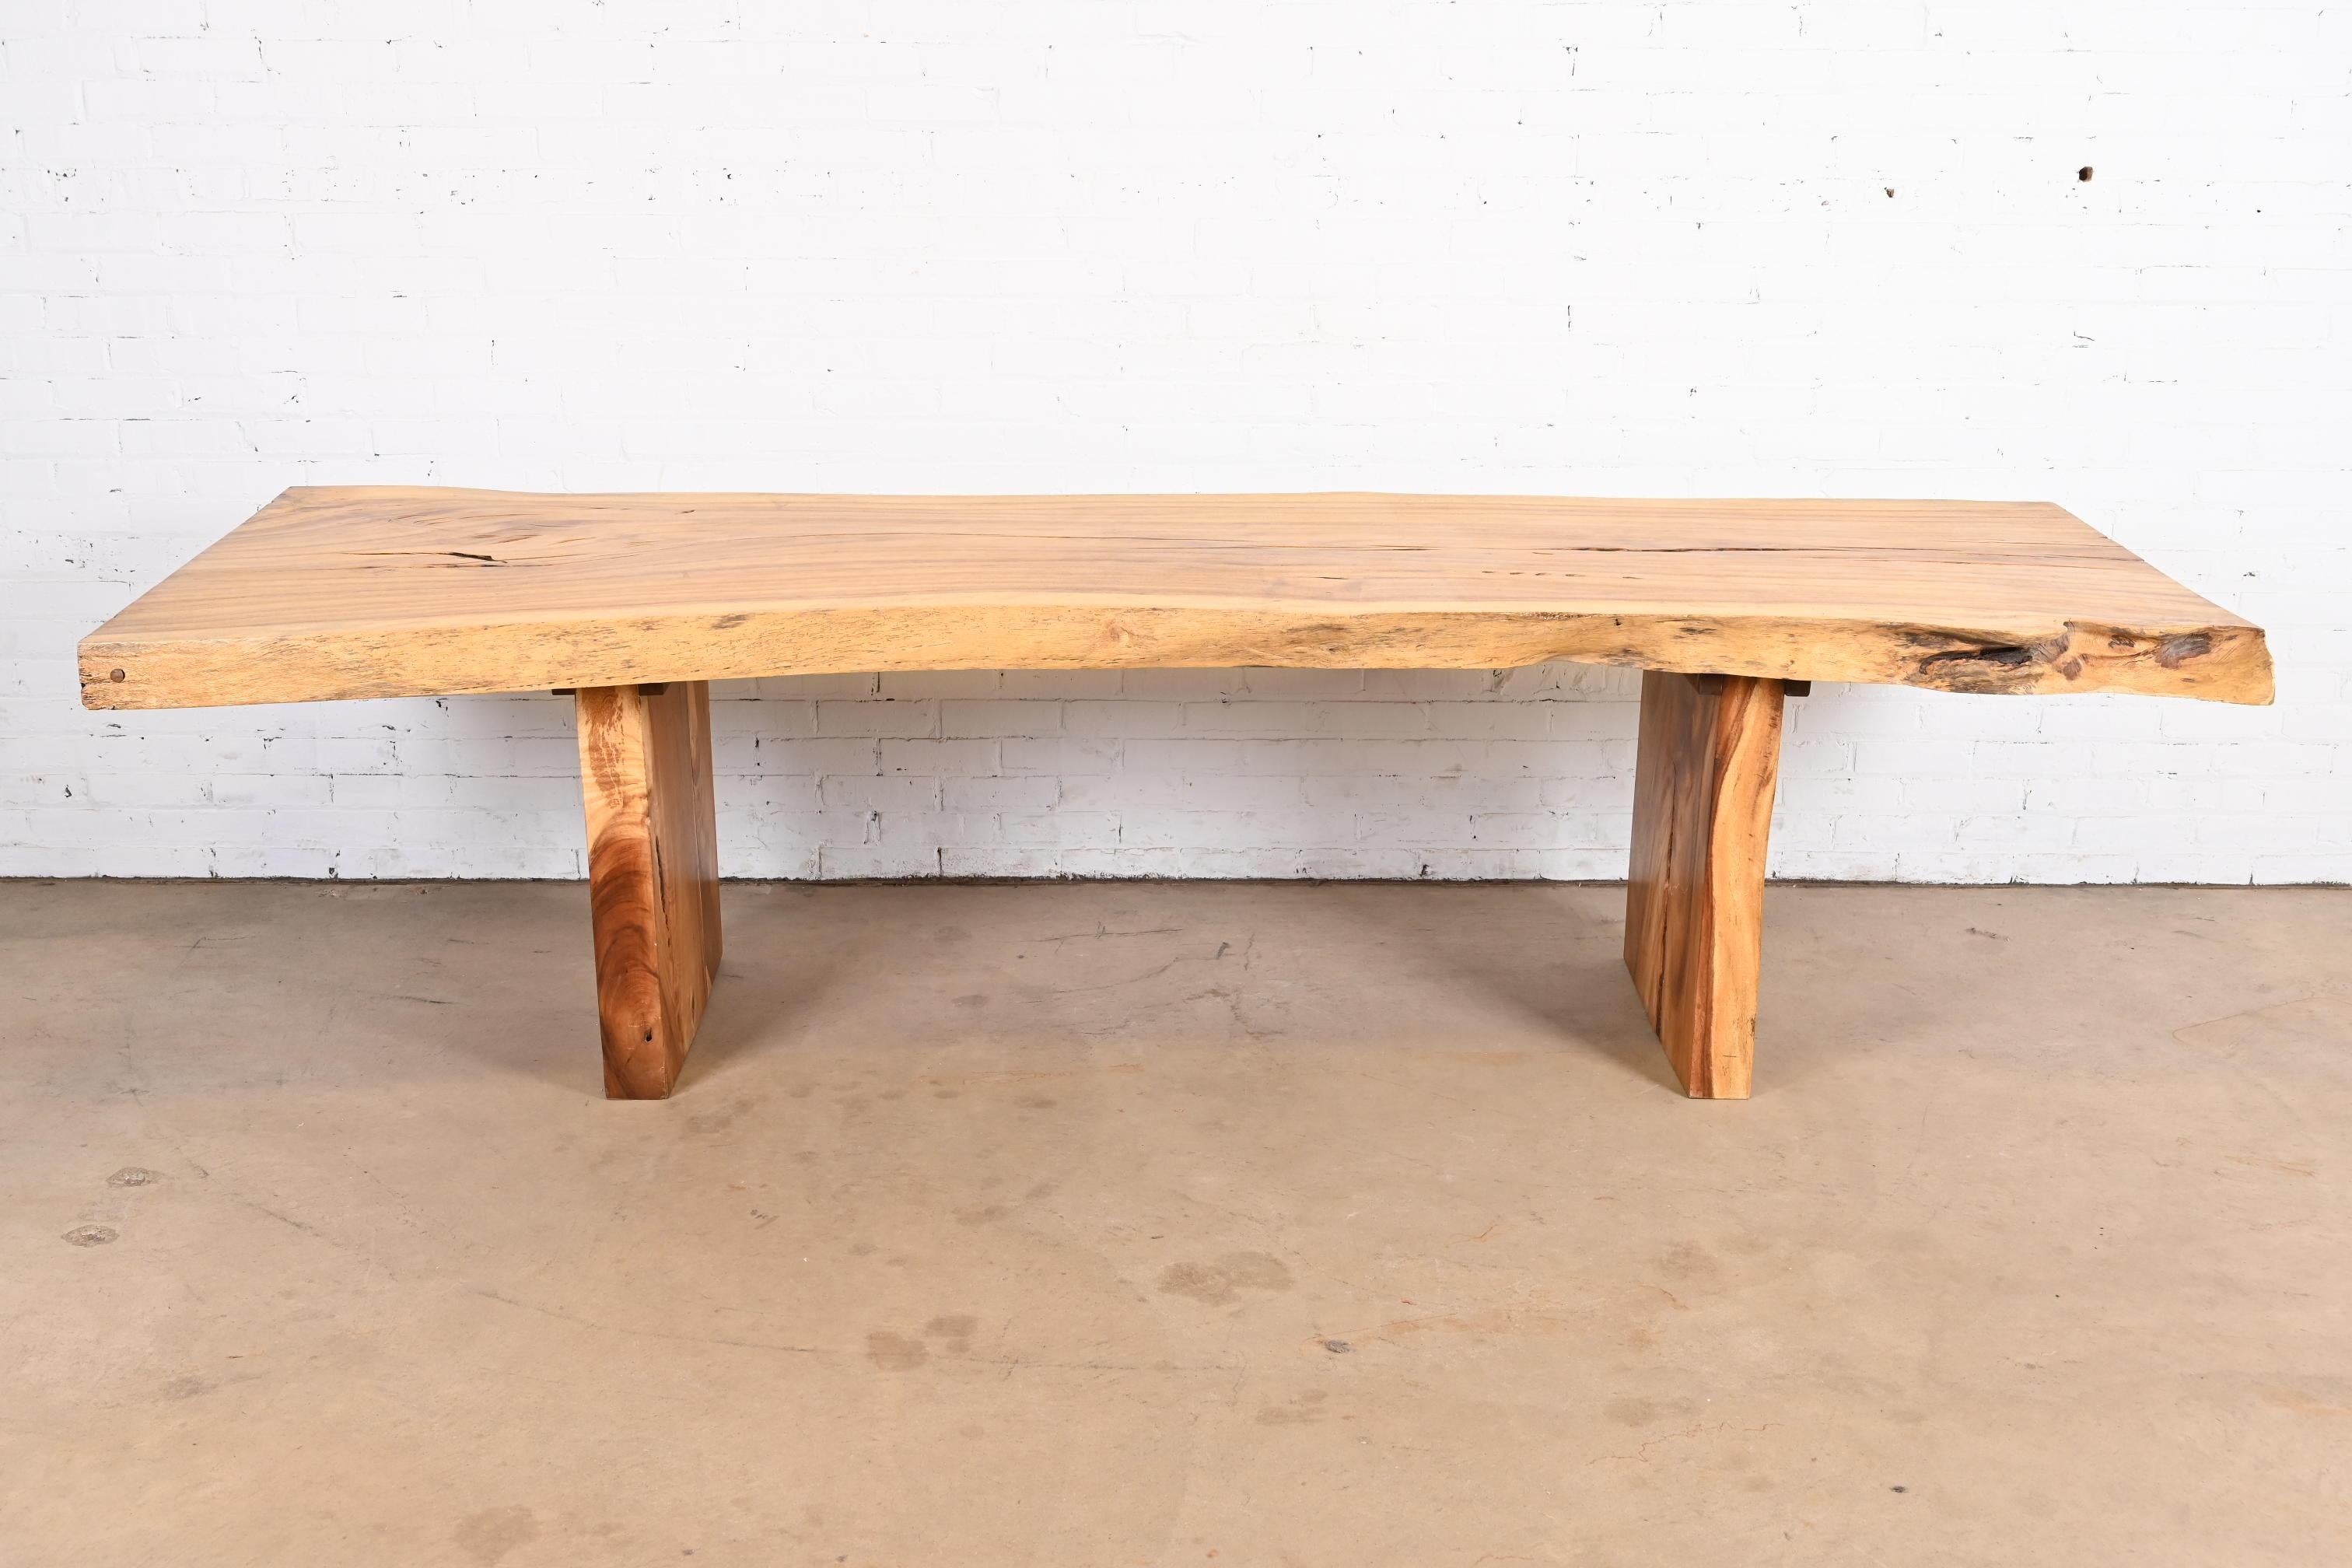 An exceptional Organic Modern dining table

USA, 20th Century

Solid walnut slab top and legs, with live edges.

Measures: 112.25